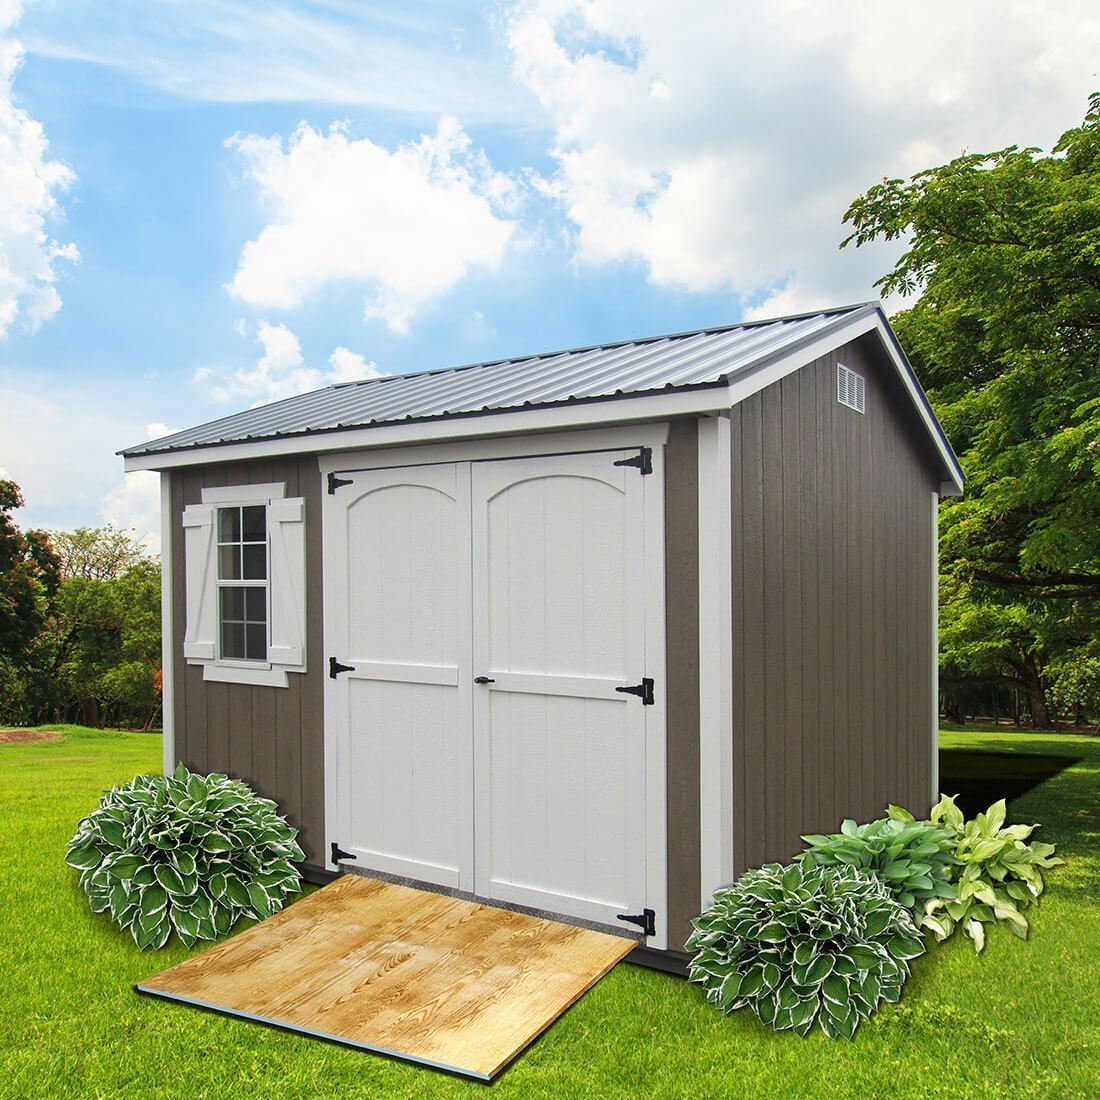 Brown cape cod style shed with white trim and doors